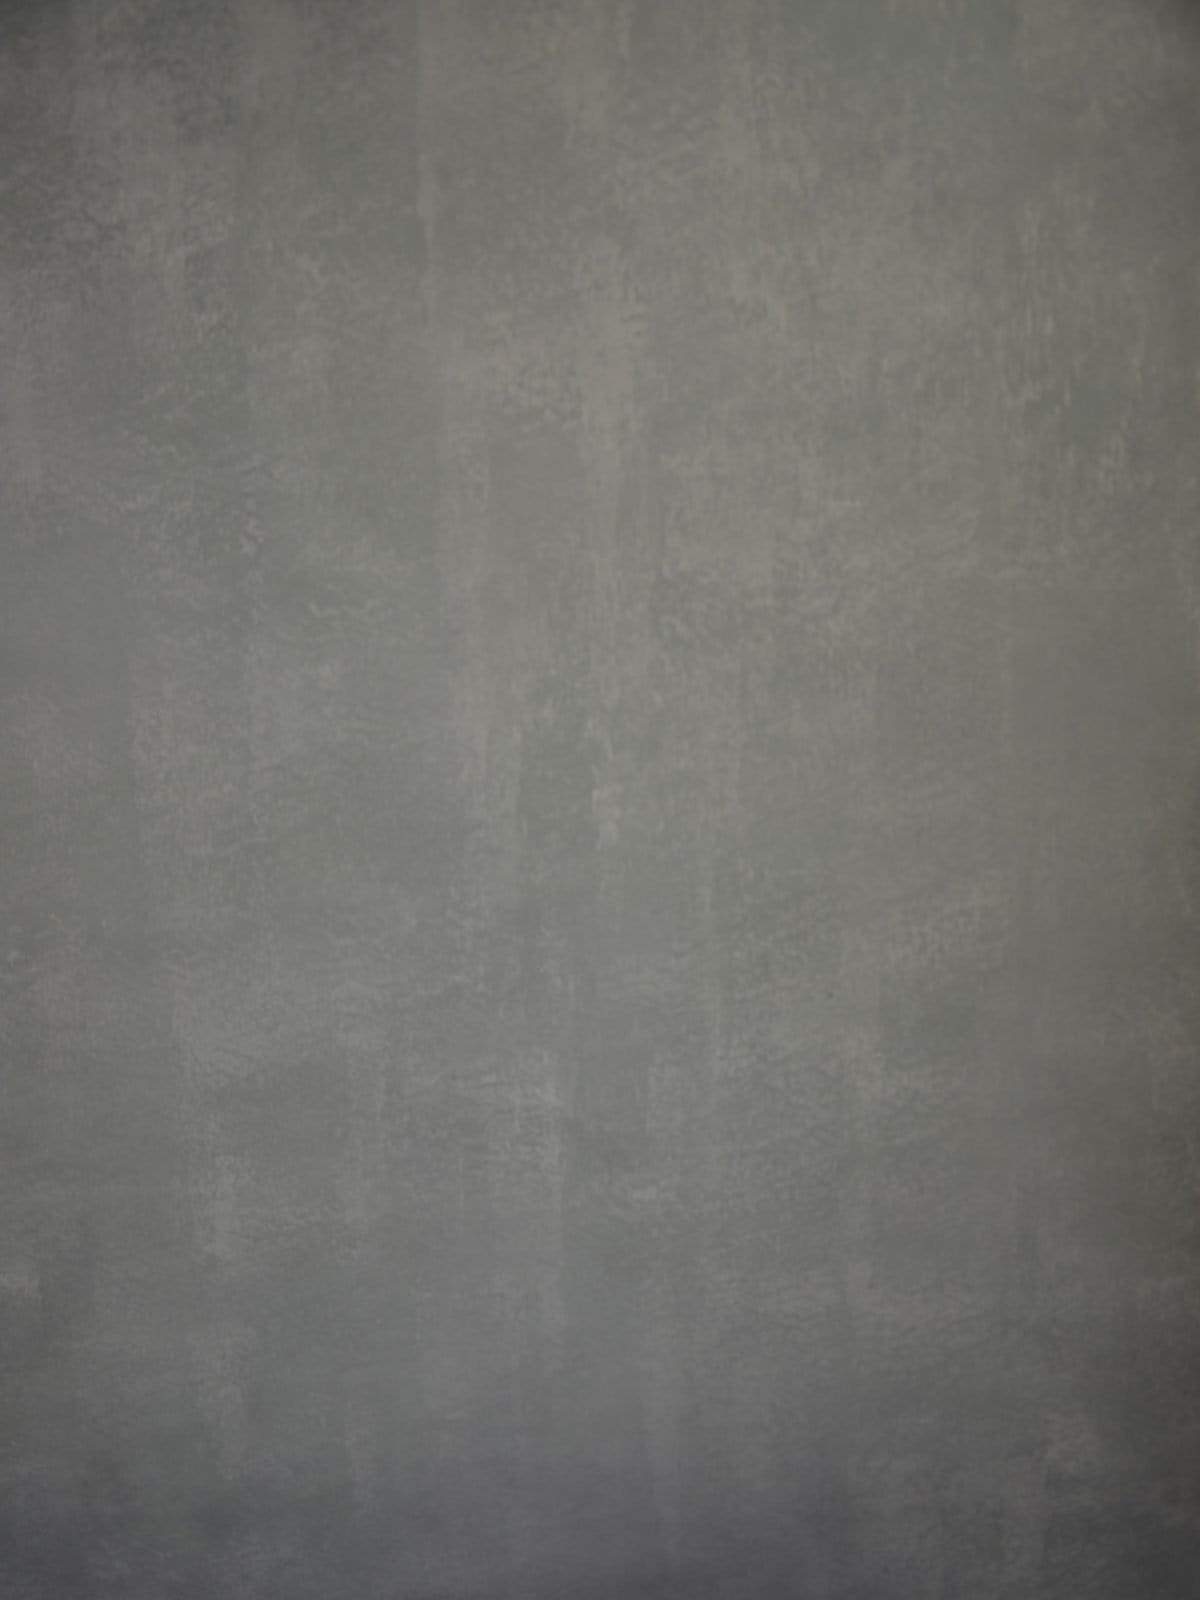 Katebackdrop£ºKate Abstract Textured Grey Backdrop for Photography